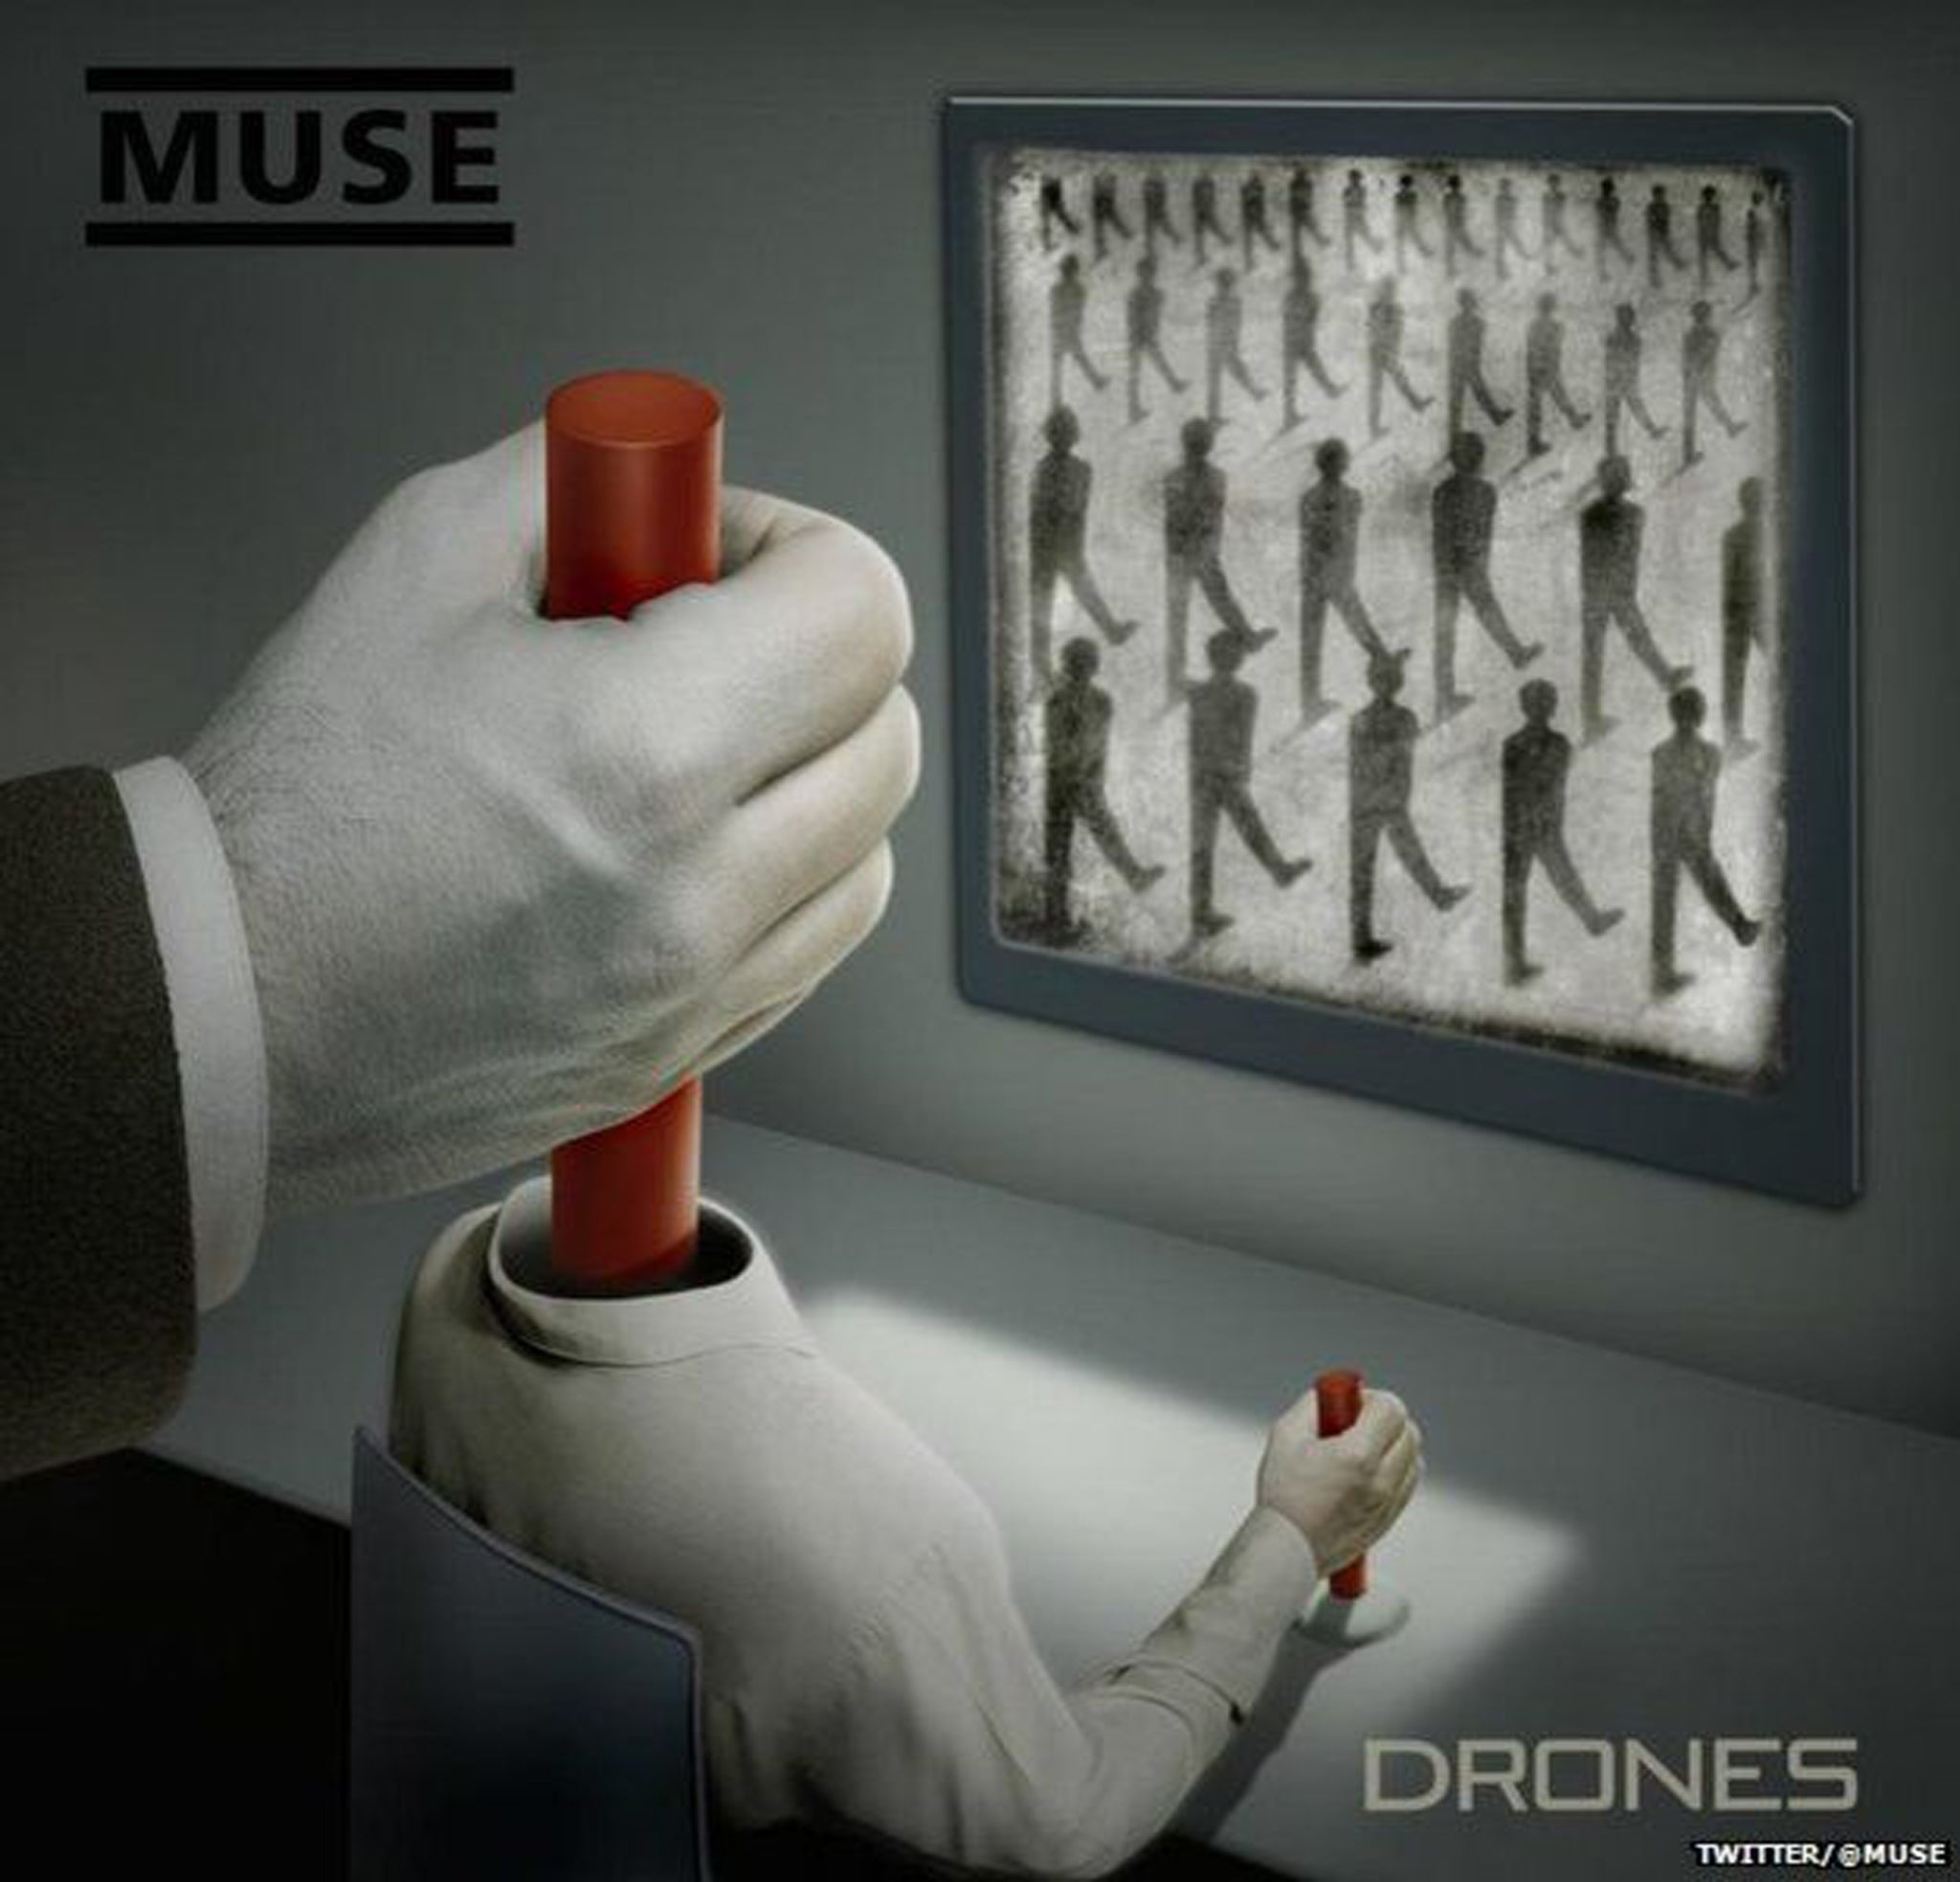 The cover art for Muse's new album Drones